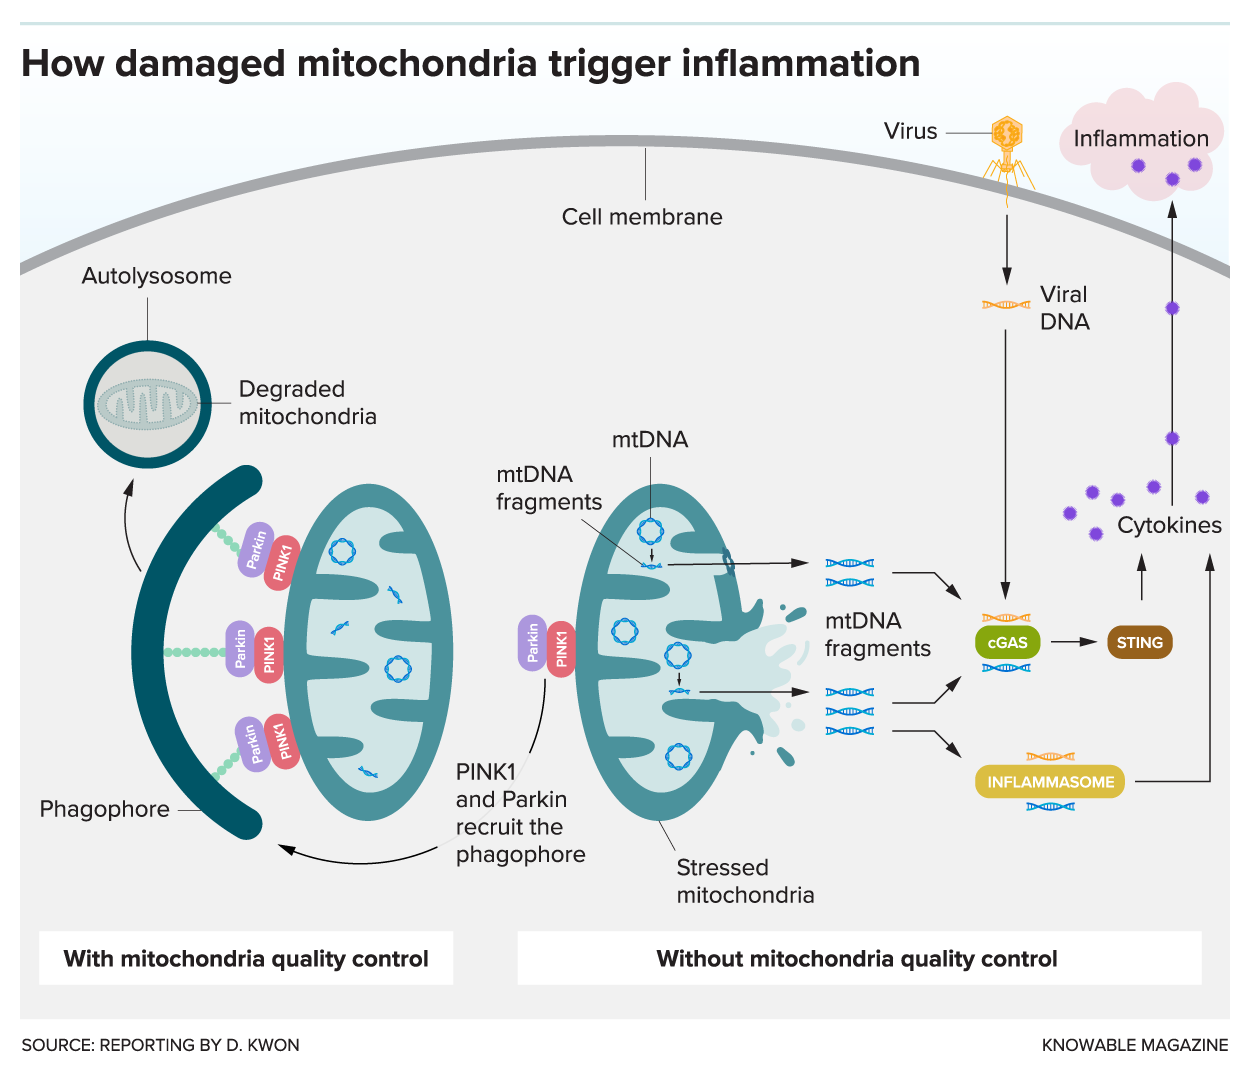 Graphic illustrates two main endpoints of damaged mitochondria in a cell. If detected by the cell’s quality control mechanisms, proteins signal the cell’s disposal system and the mitochondria is degraded. If not detected, the damage can lead to the ejection of mitochondrial DNA fragments that alert the cell’s system for detecting pathogens. These then trigger the inflammation cascade.